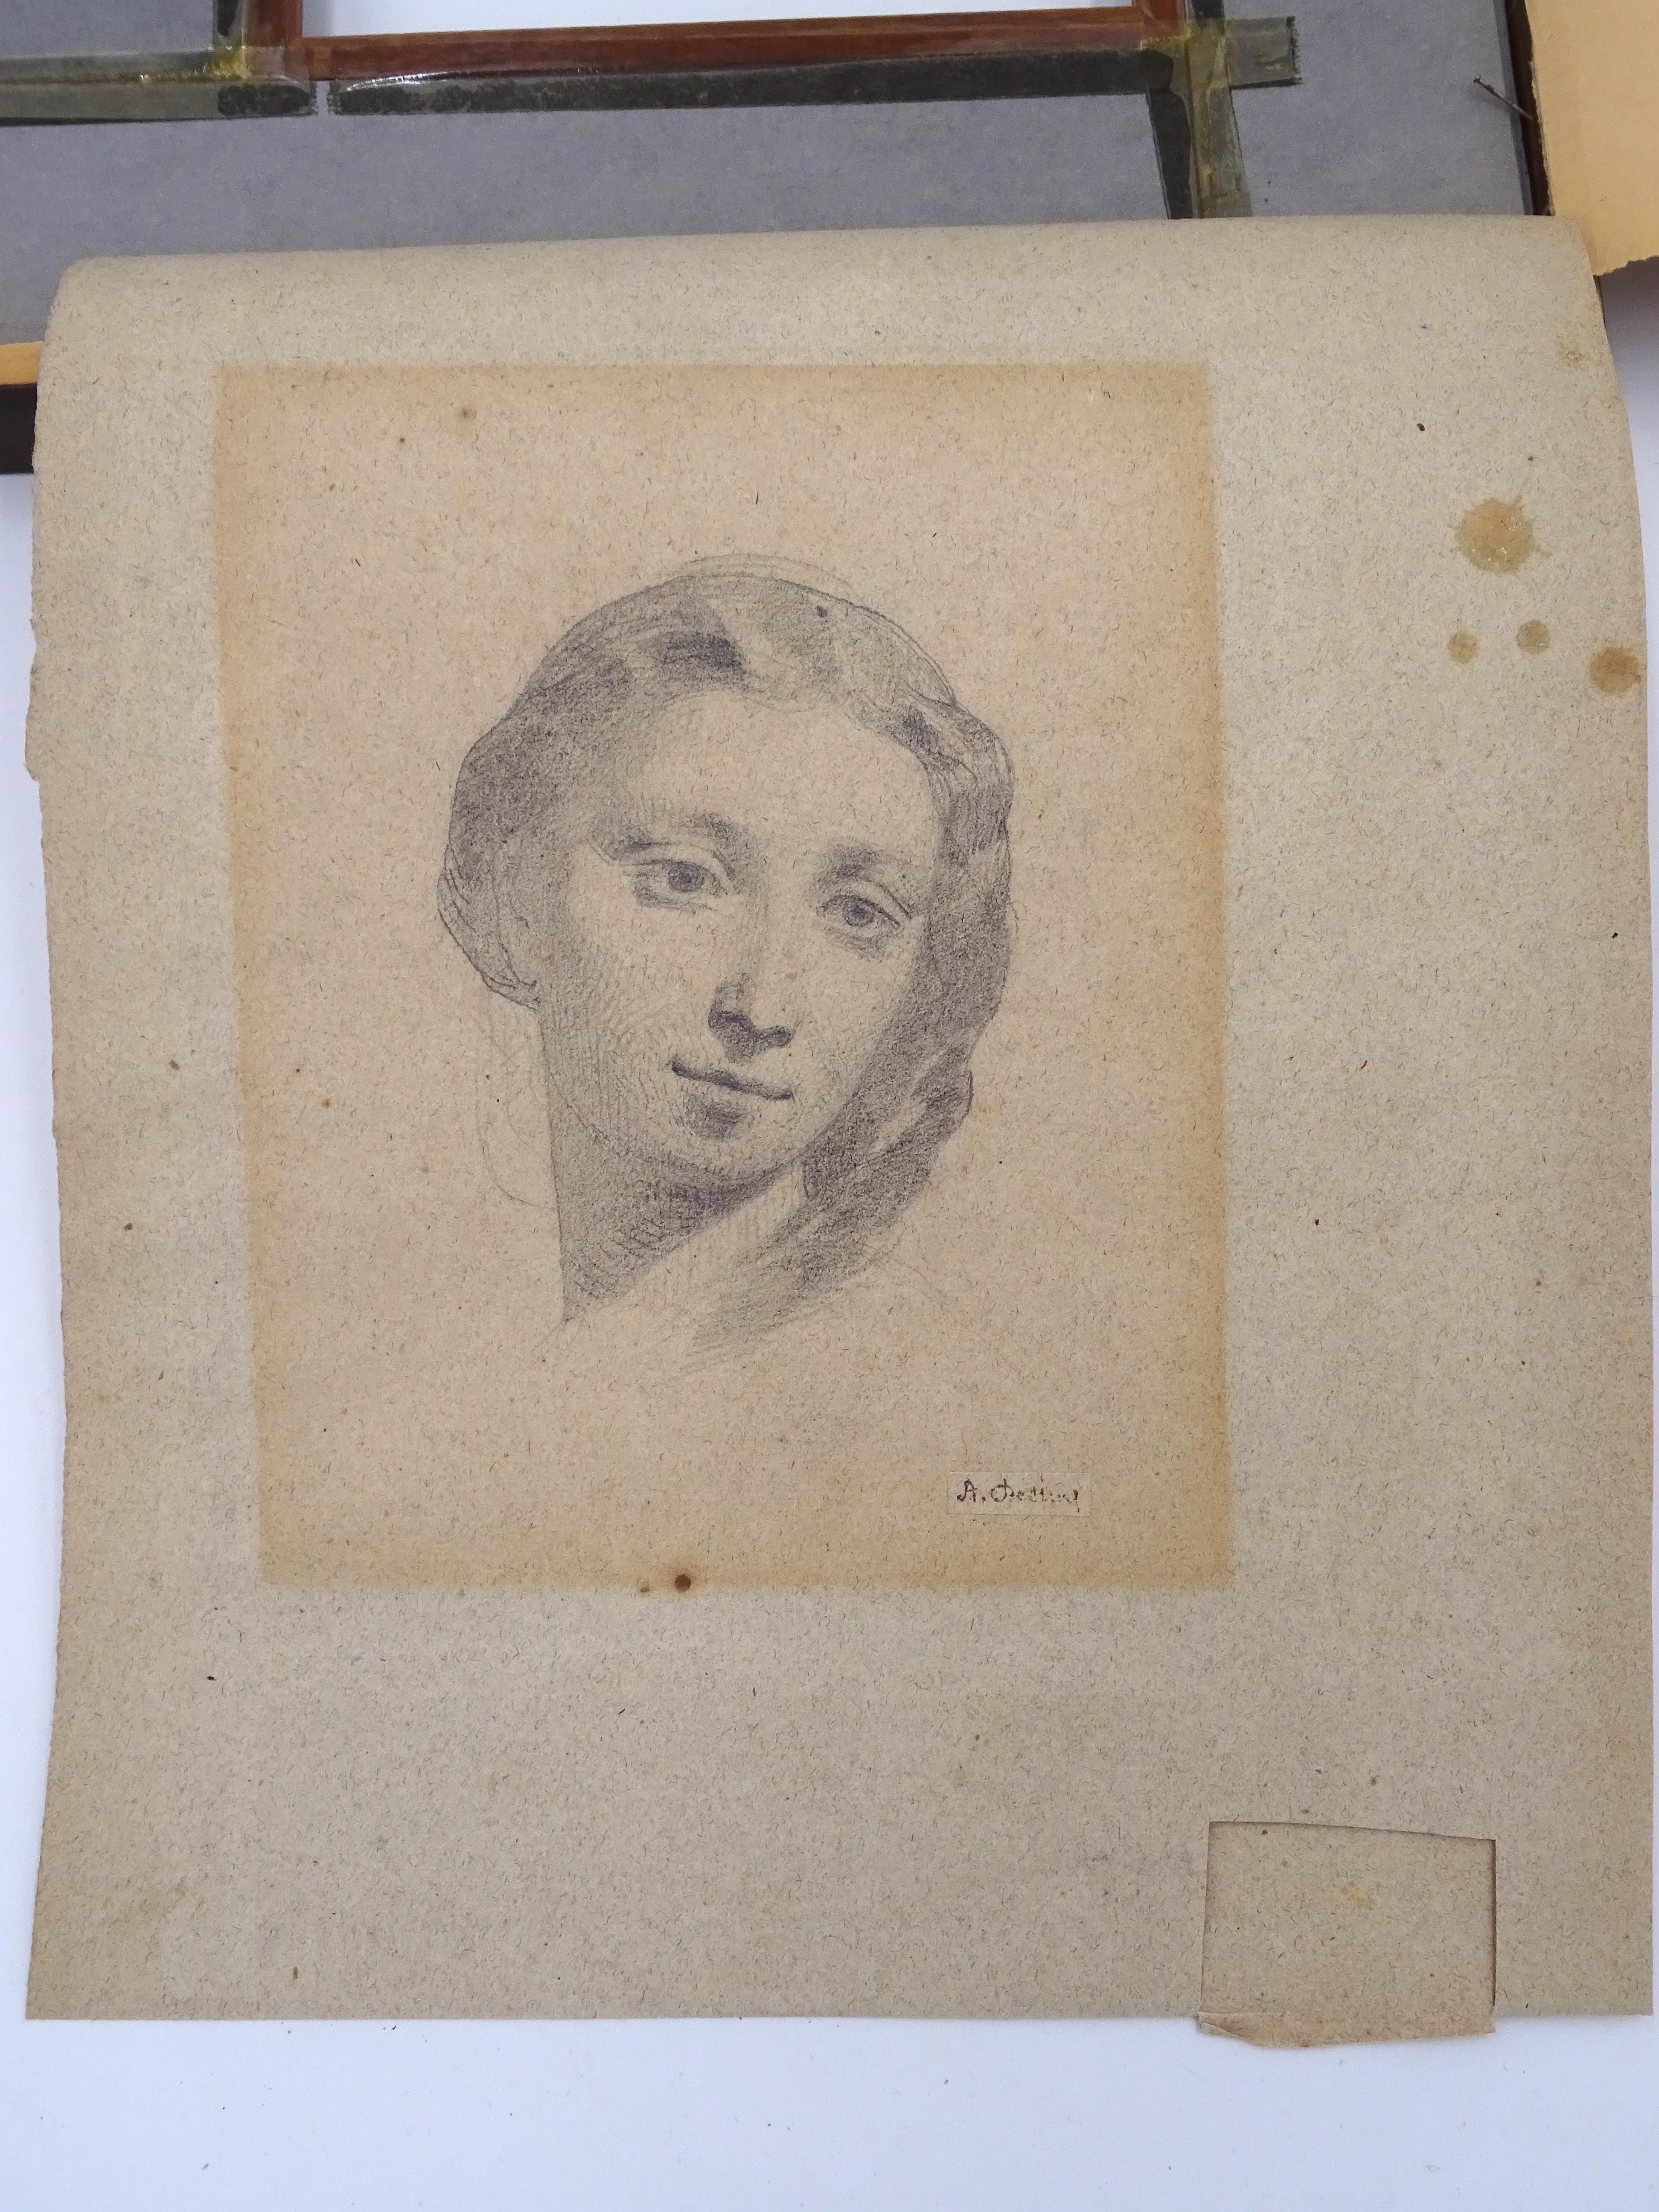 Drawing made in pencil on paper measuring 15 x 19 cm by artist Alberto Pasini (Busseto 1826 - Cavoretto 1899) depicting a female face datable to around 1870.

The work has the signature A.Pasini in the lower right corner, above a small piece of